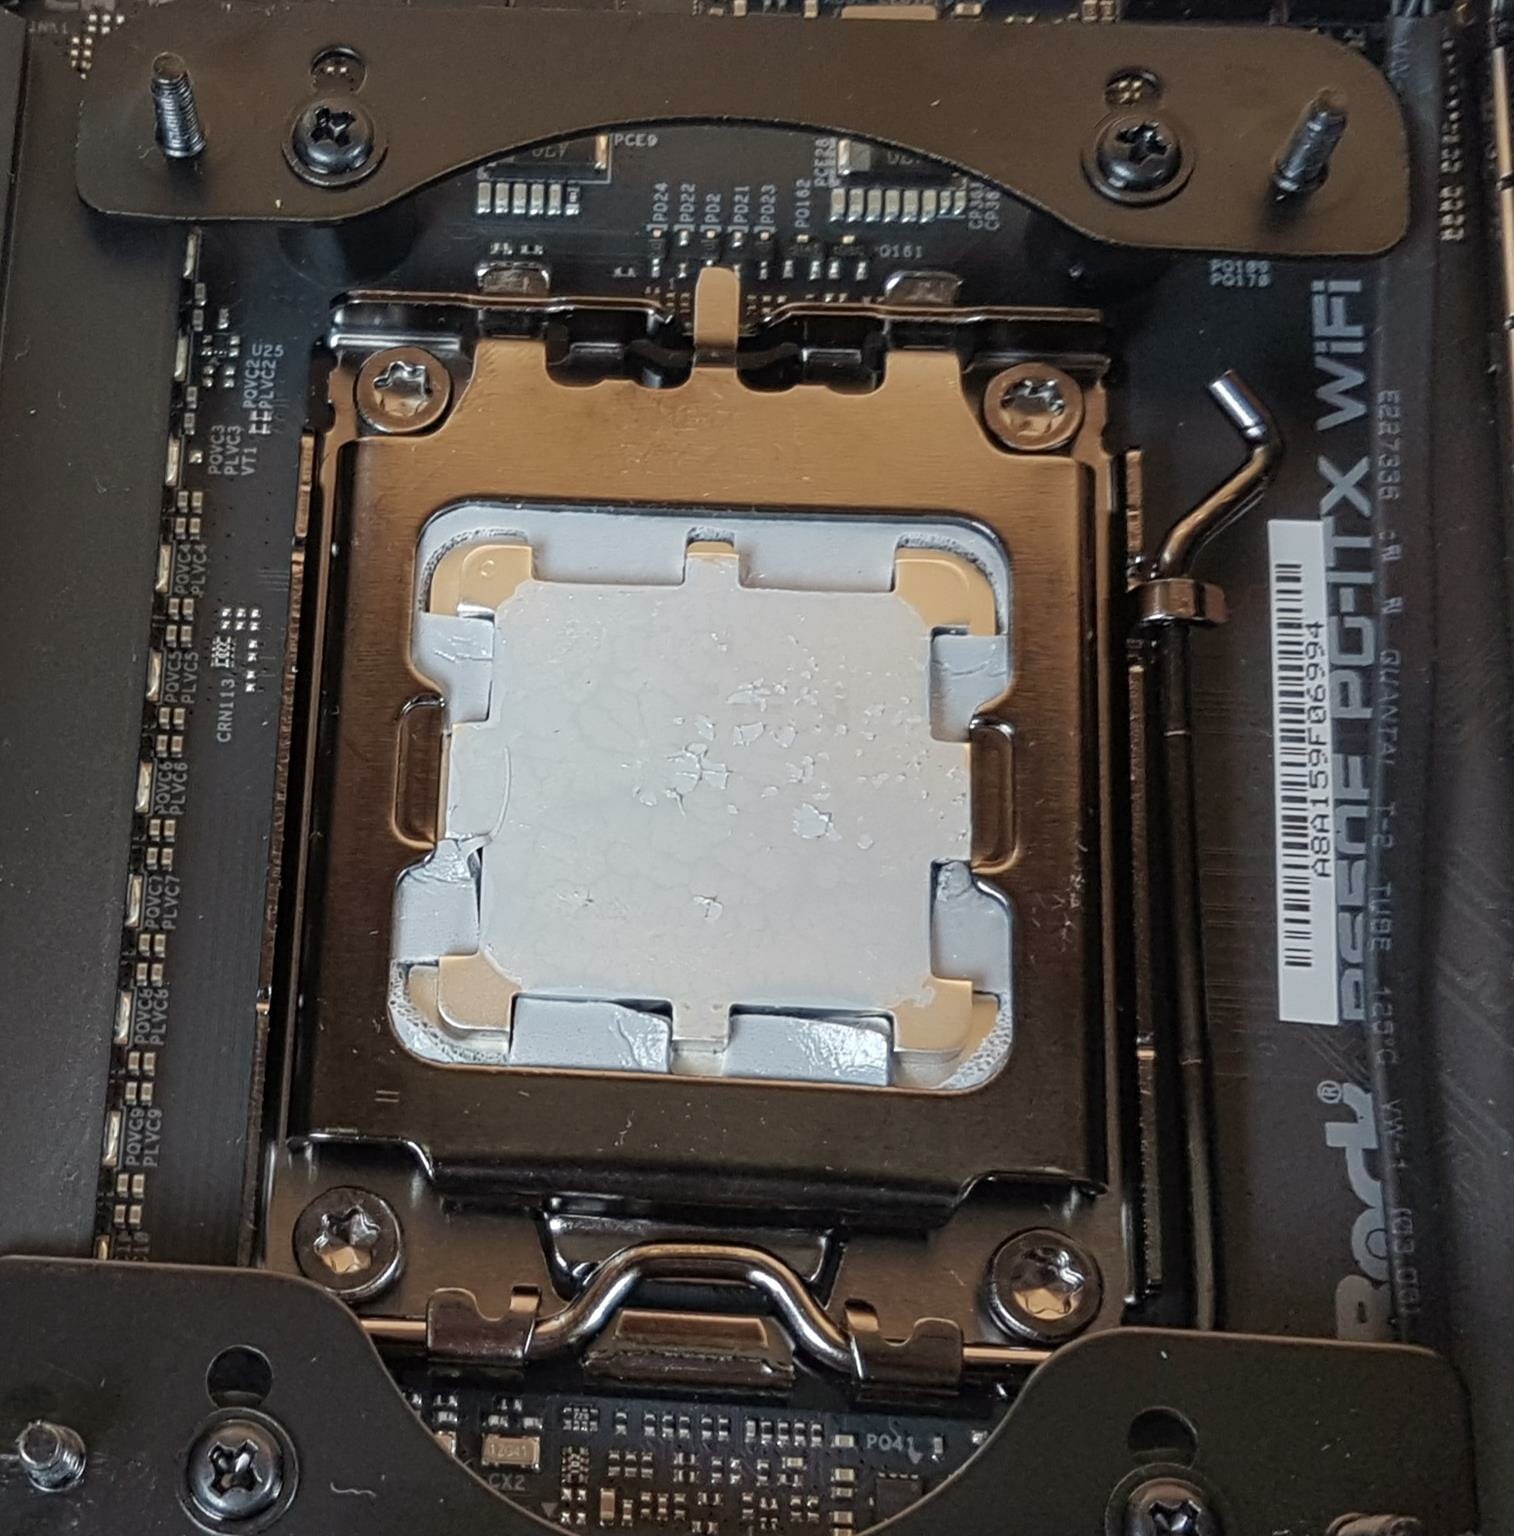 For those that get thermal paste triggeredI give you thermal grizzly's  recommended application : r/pcmasterrace